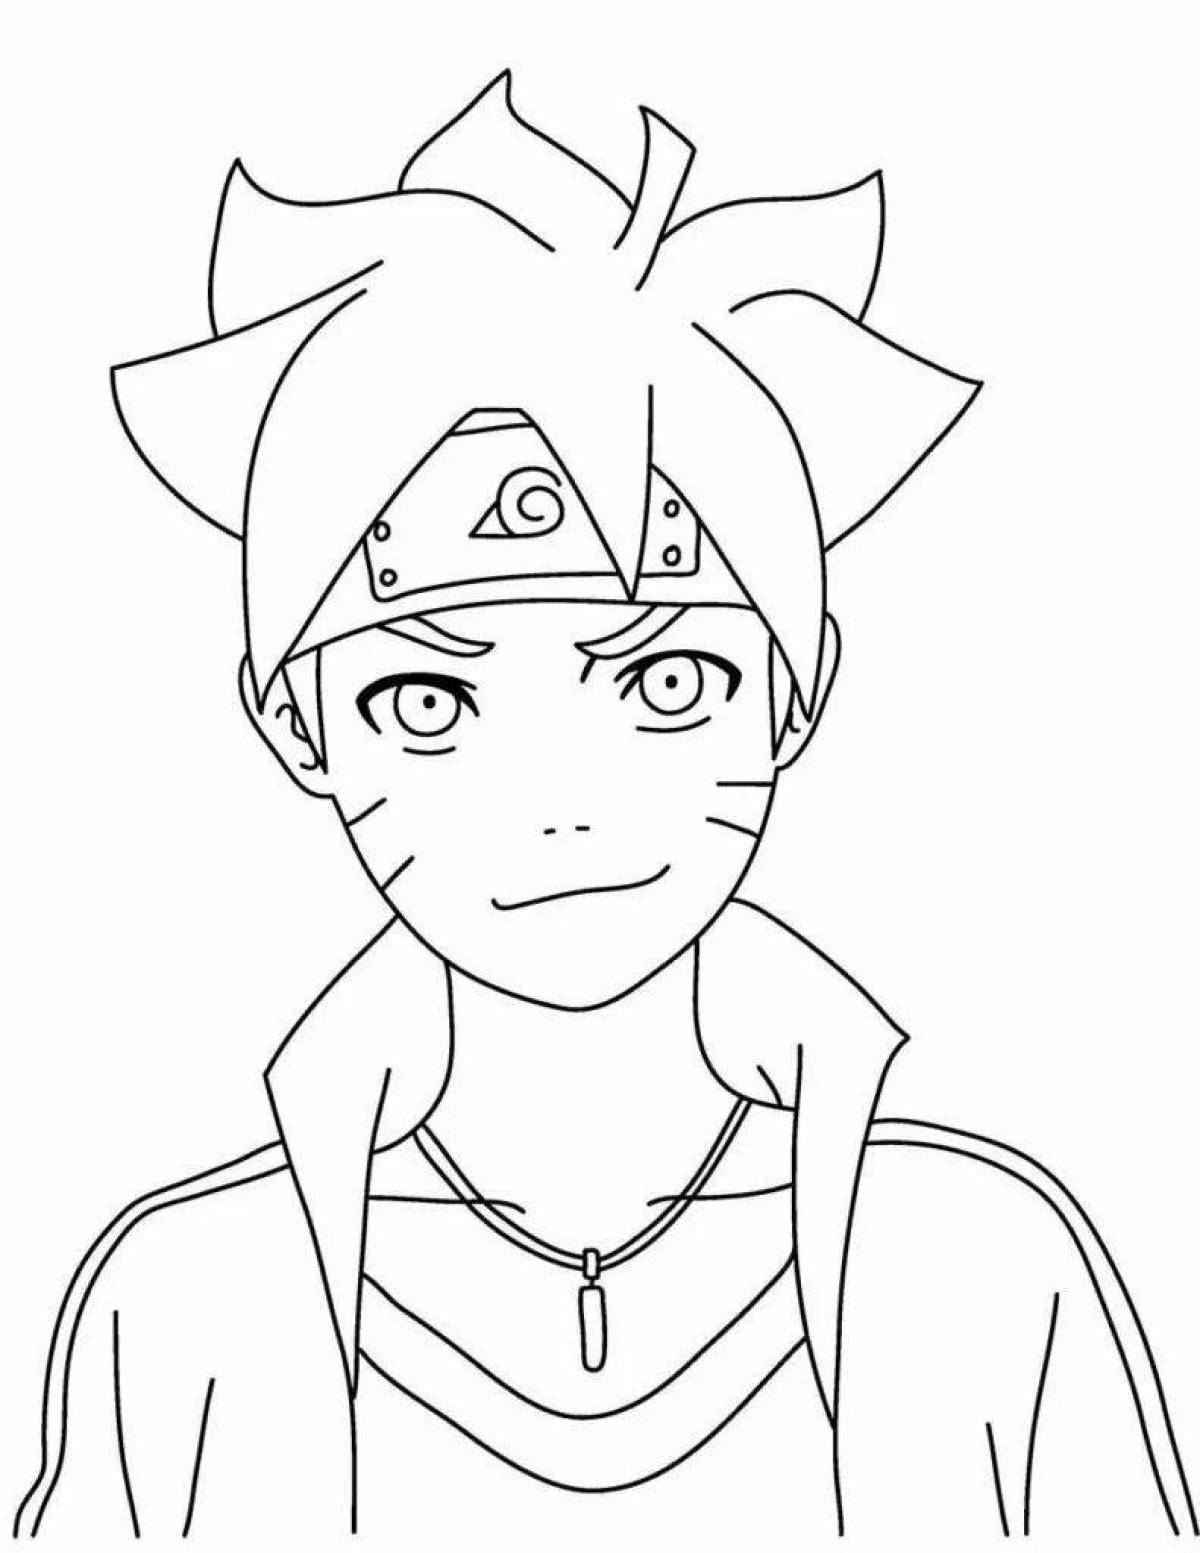 Majestic coloring page boruto with jogan